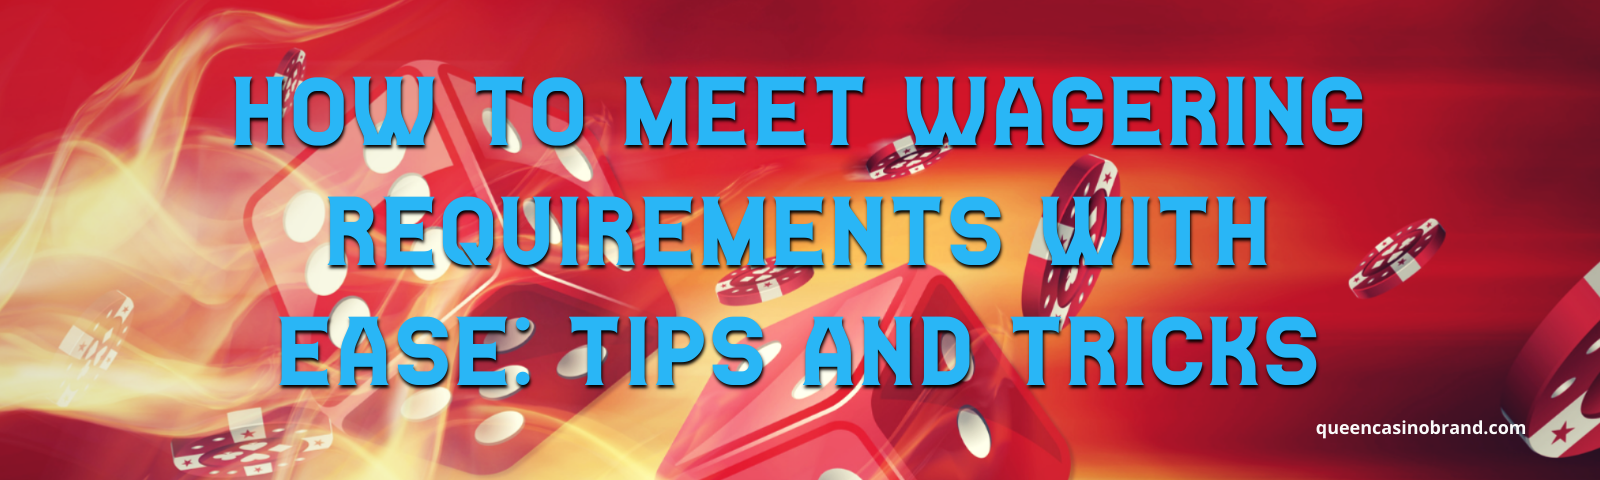 Wagering Requirements Tips and Tricks